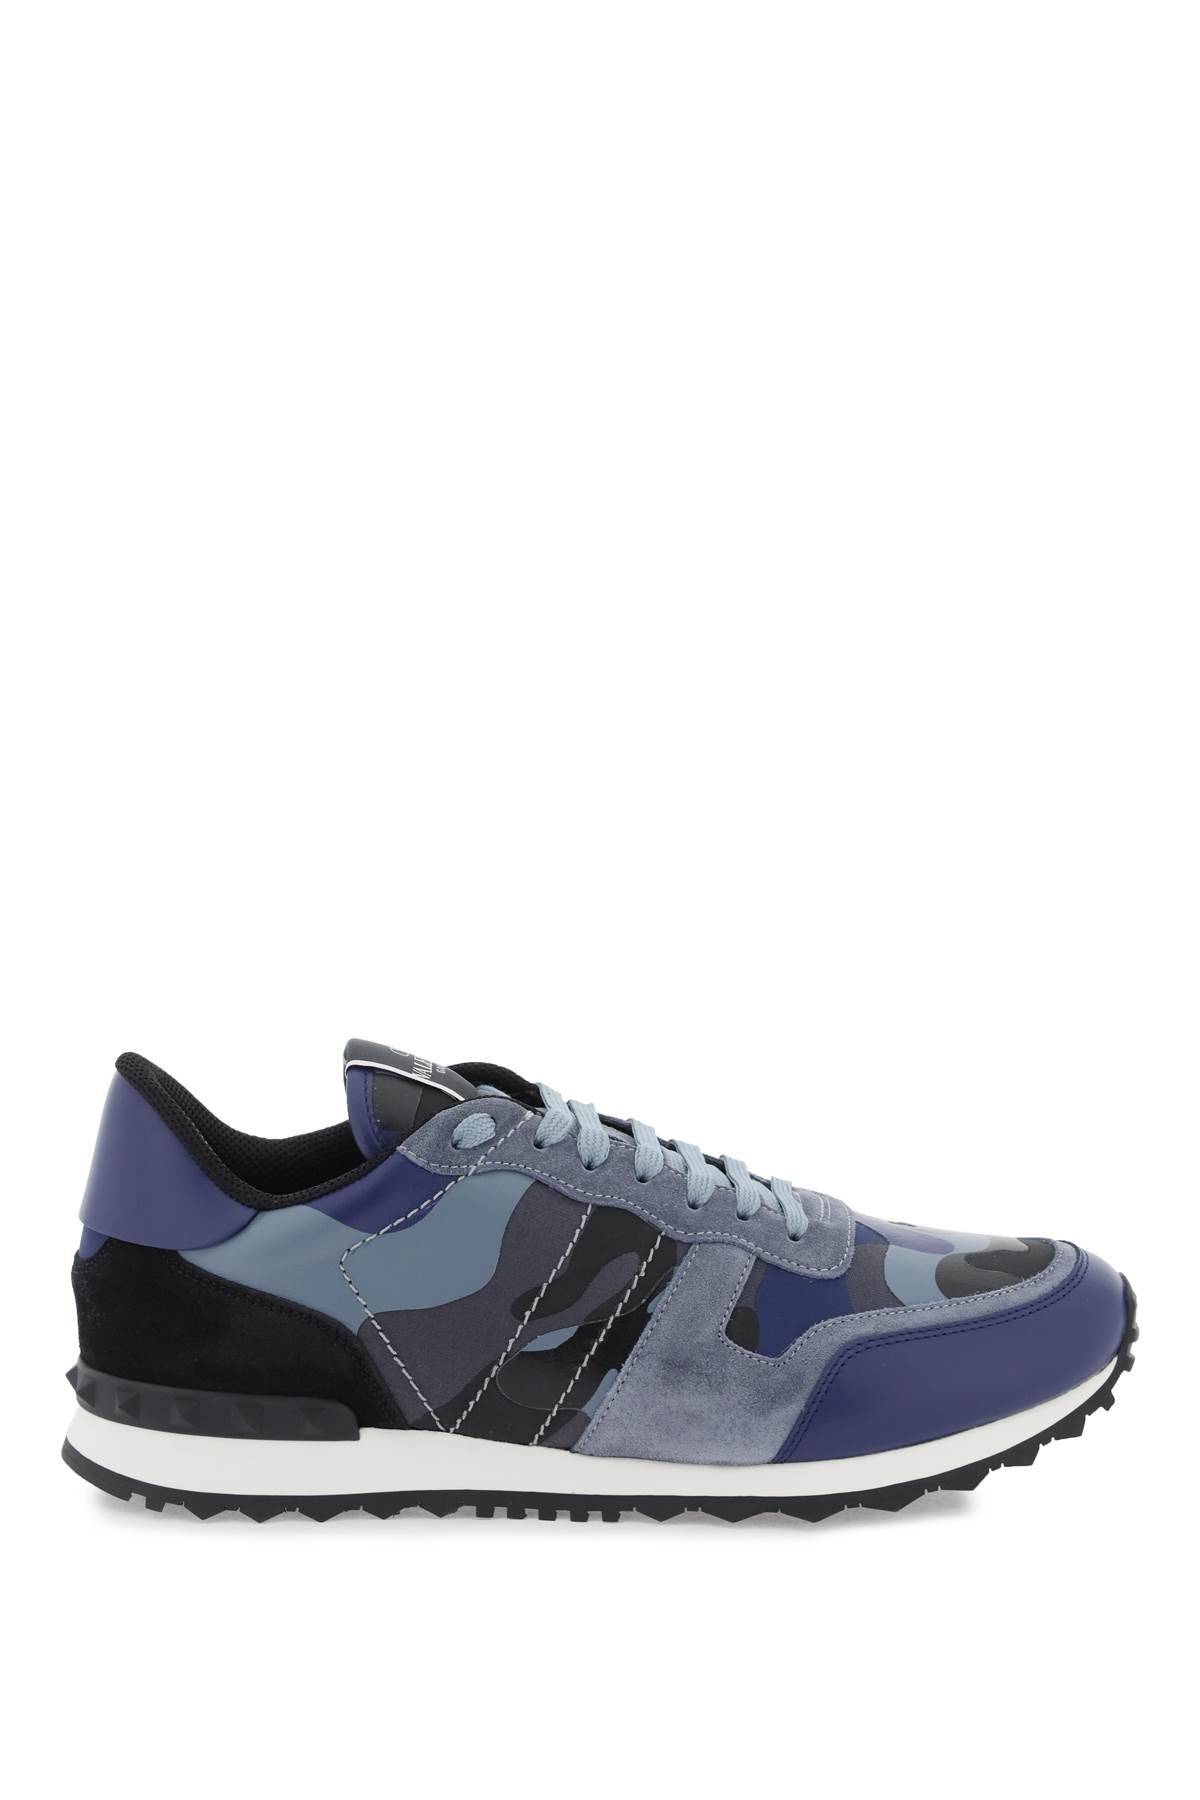 Shop Valentino Camouflage Rockrunner Sneakers In Grey,black,blue